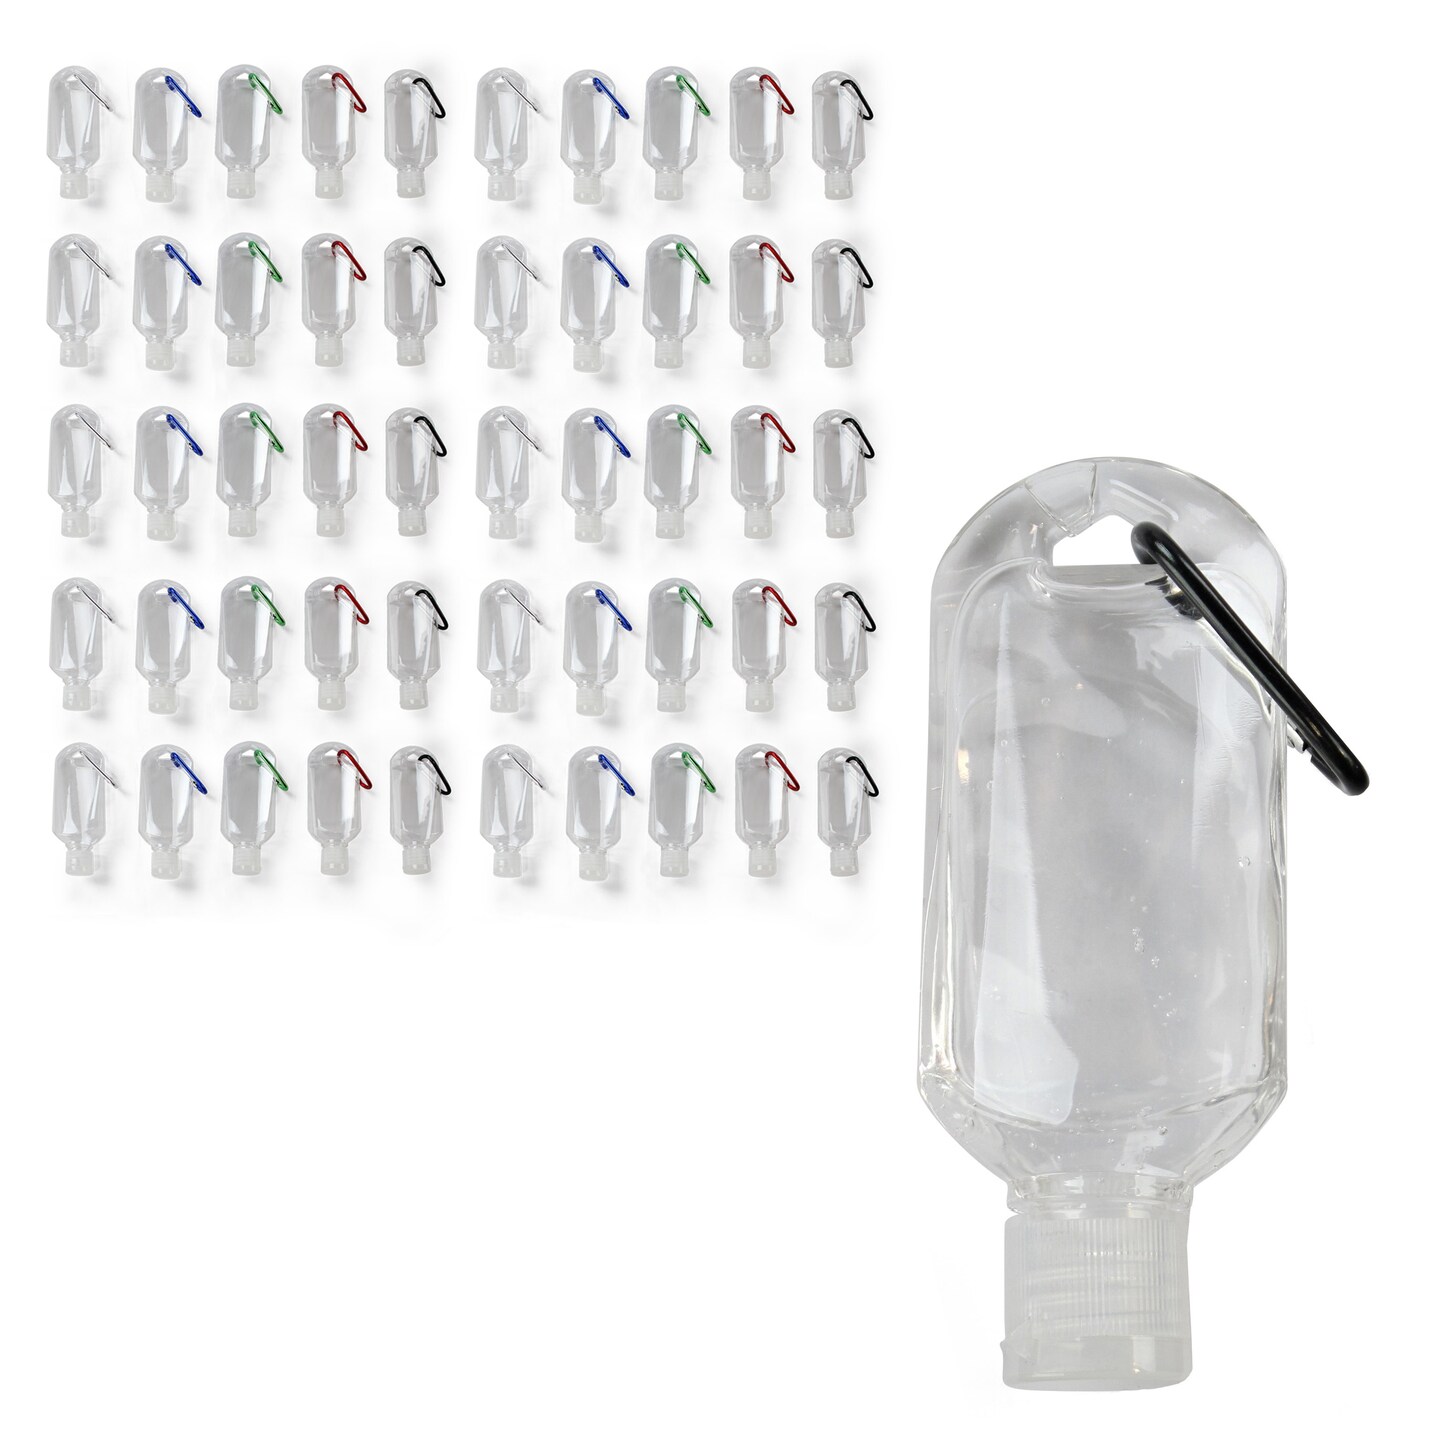 Spec101 Small Travel Bottles with Carabiner Clip - 2oz Fillable Pack of 50